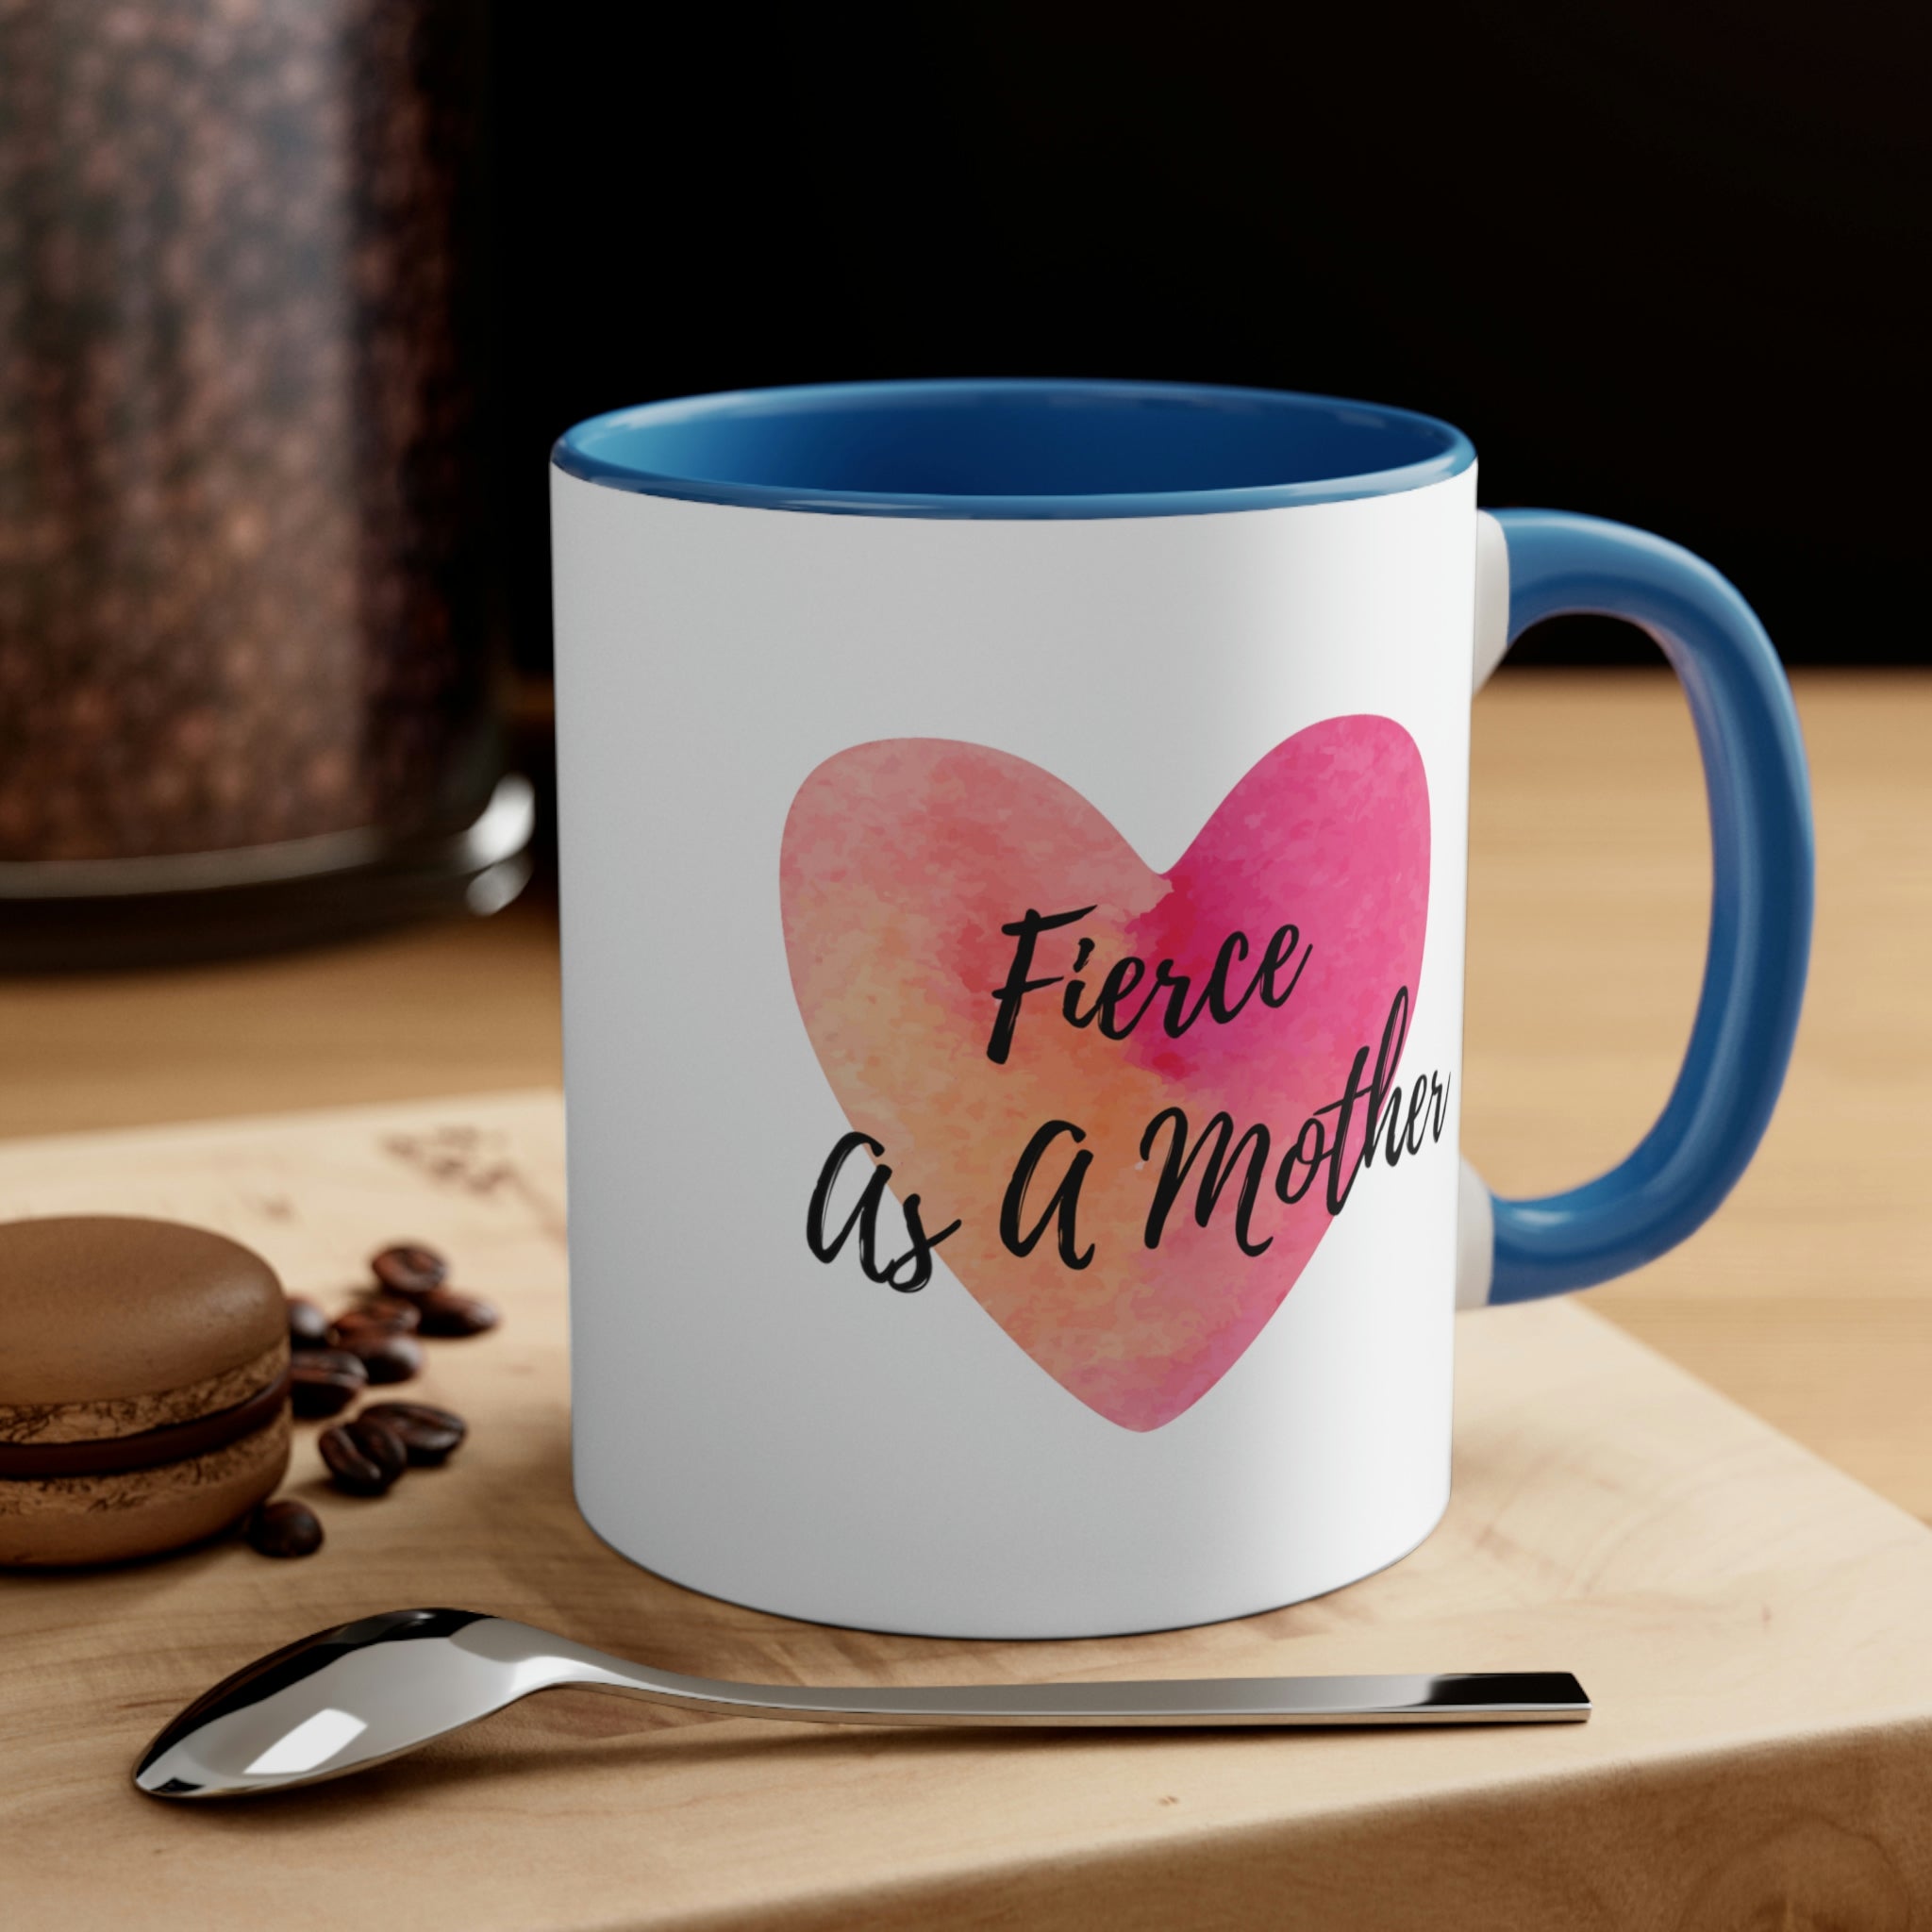 "Fierce As A Mother" Heart Accent Coffee Mug, 11oz - 5 colors